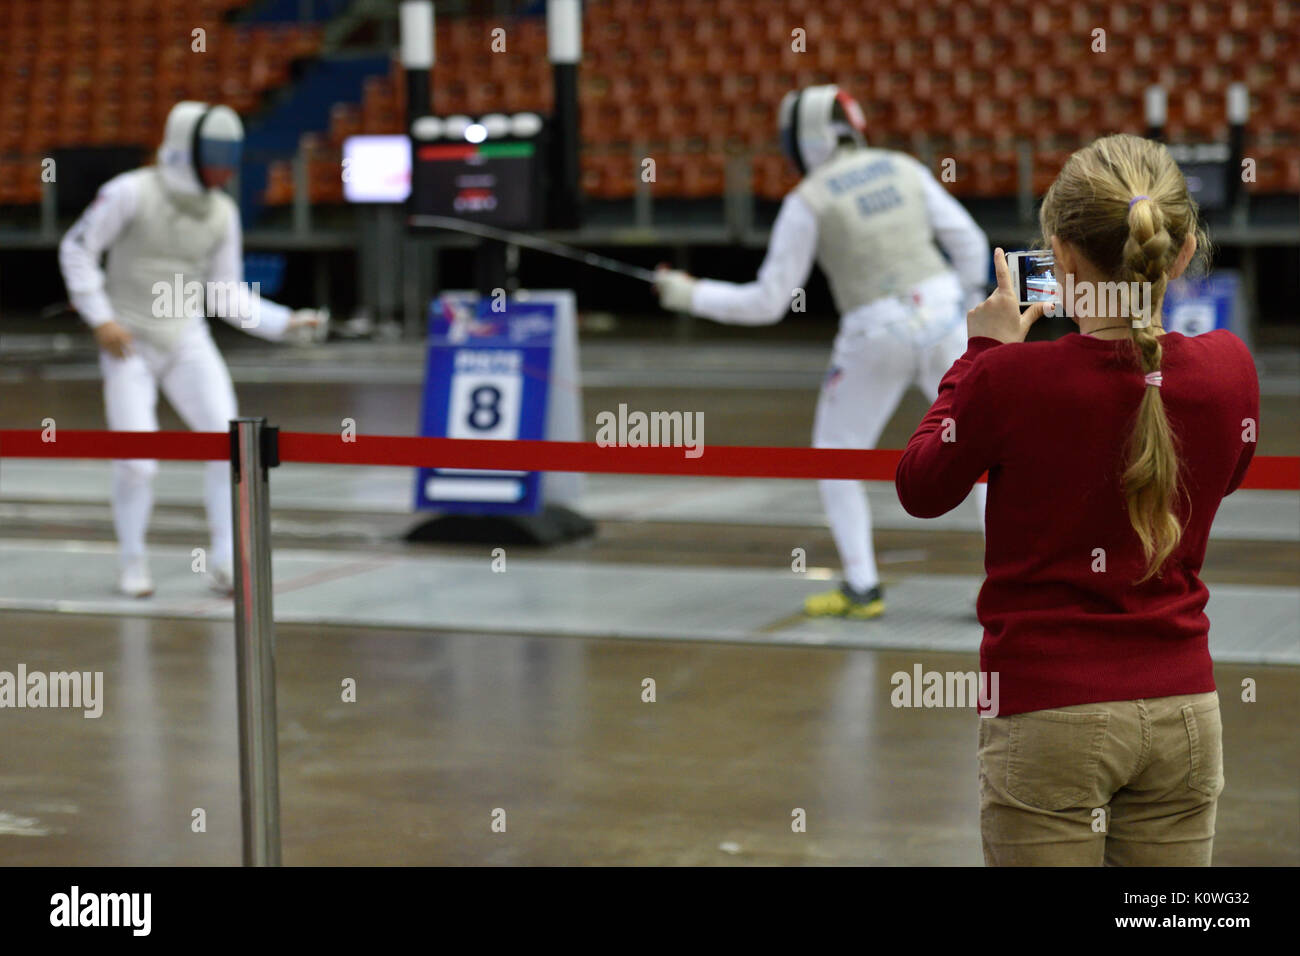 St. Petersburg, Russia - May 3, 2015: Girl make photo of Russian fencers training during the International fencing tournament St. Petersburg Foil, The Stock Photo